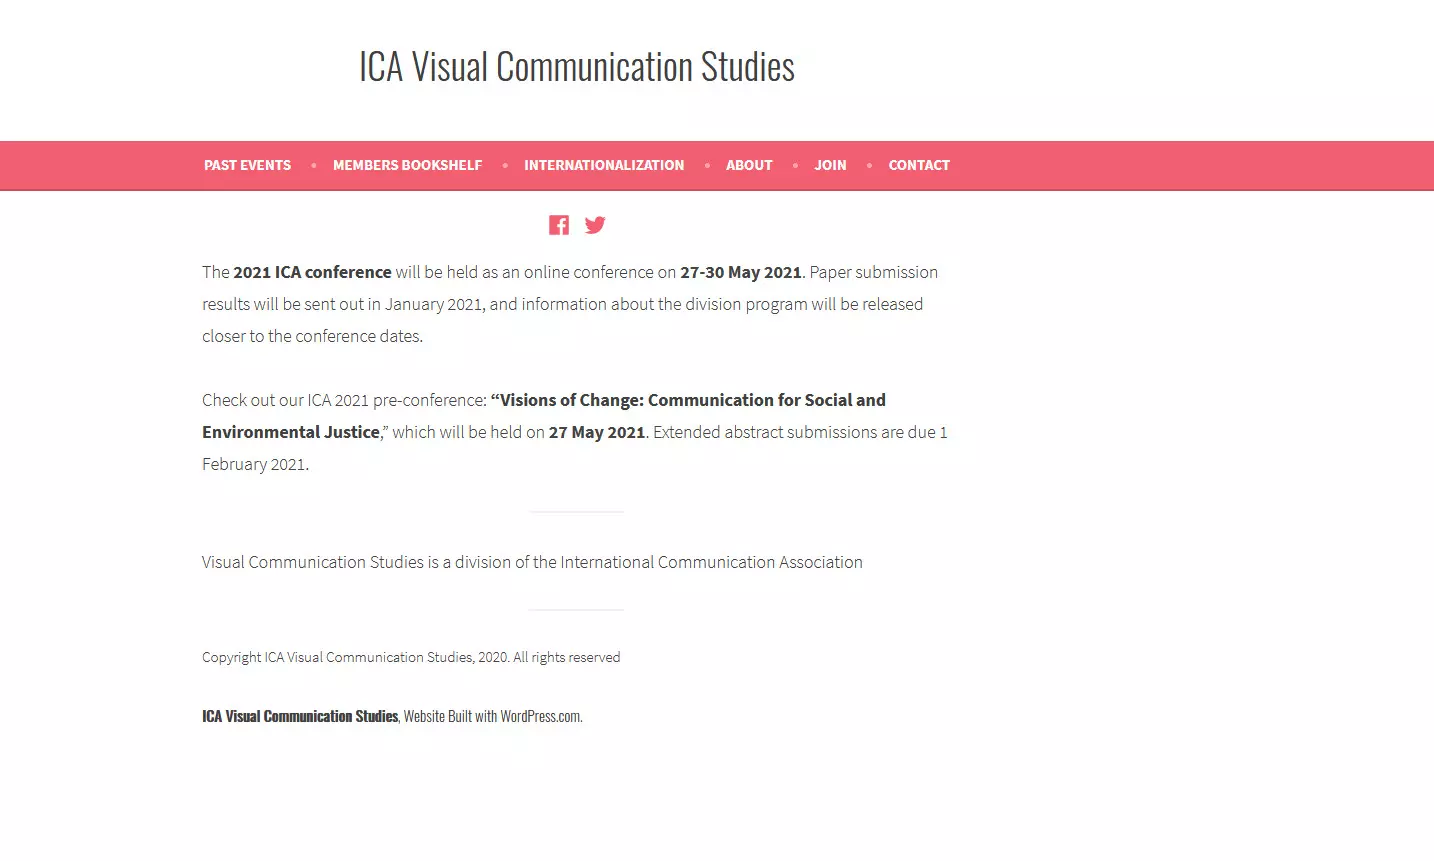 CFP for 2021 ICA Pre-Conference Visions of Change: Communication for Social and Environmental Justice